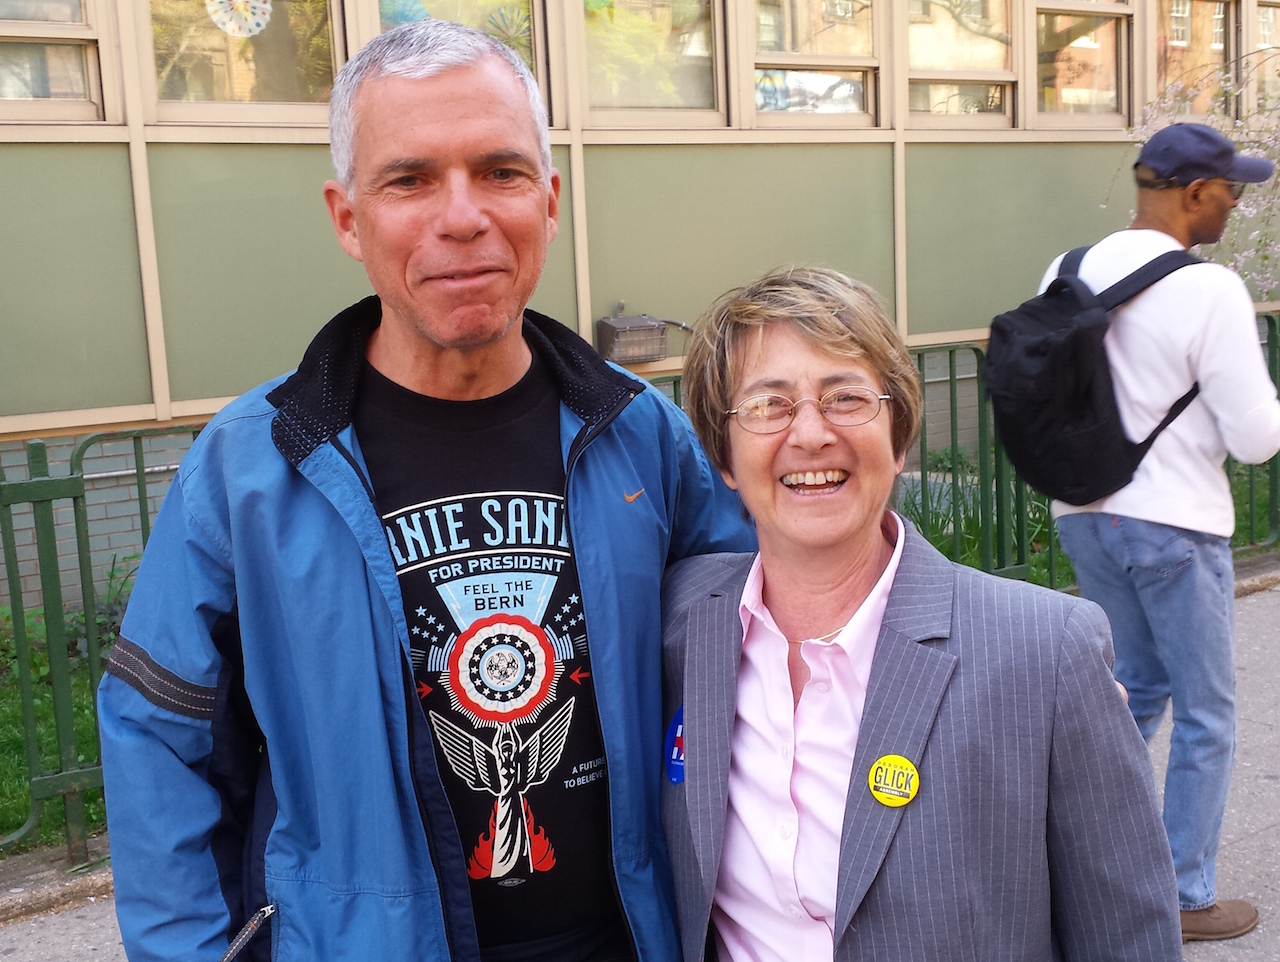 Despite their political differences, Clinton booster Assemblymember Deborah Glick, right, and Sanders backer Leo Weinberger could still pose for a photo together. Weinberger, who is registered as an independent, could not vote in the Democratic primary, but wore his Sanders T-shirt to show support.  Photo by The Villager 